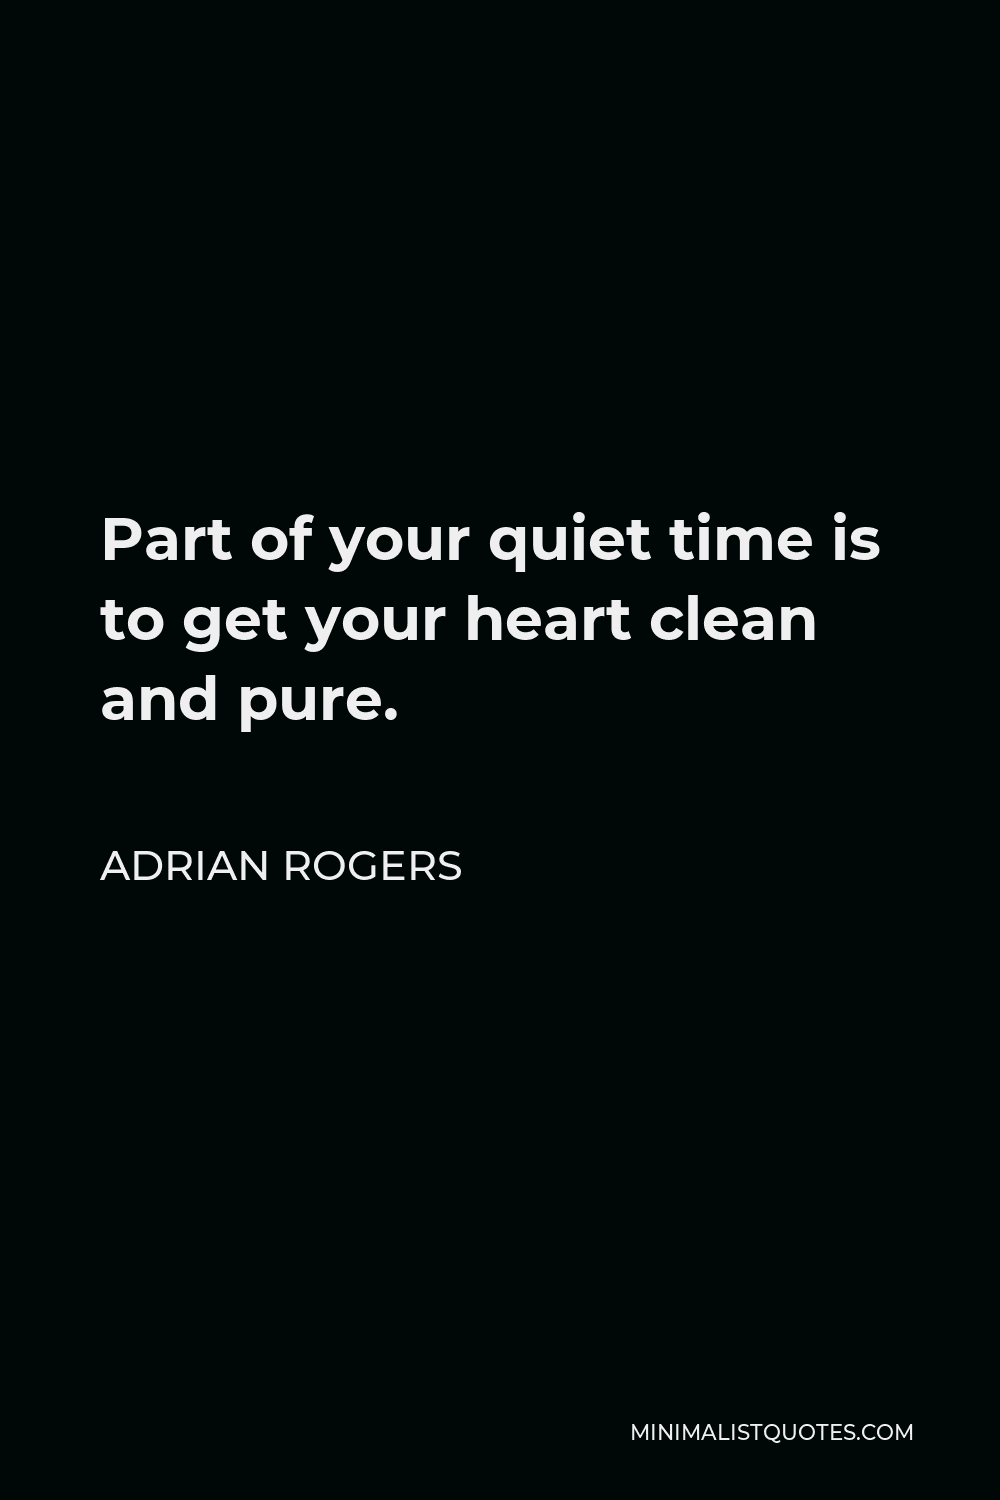 Adrian Rogers Quote - Part of your quiet time is to get your heart clean and pure.